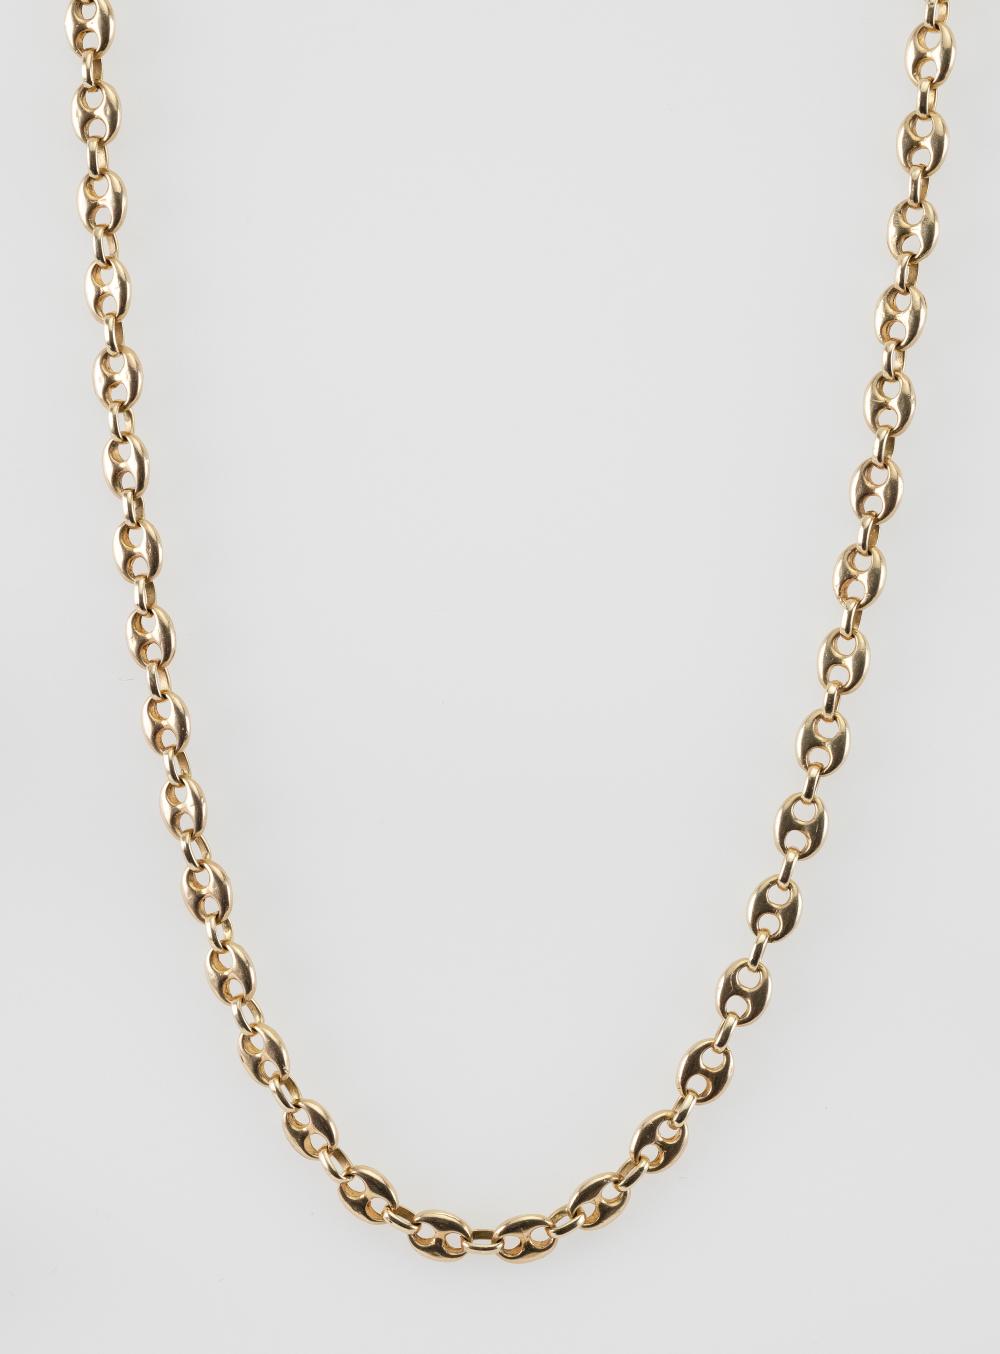 14KT GOLD GUCCI/ANCHOR CHAIN NECKLACE